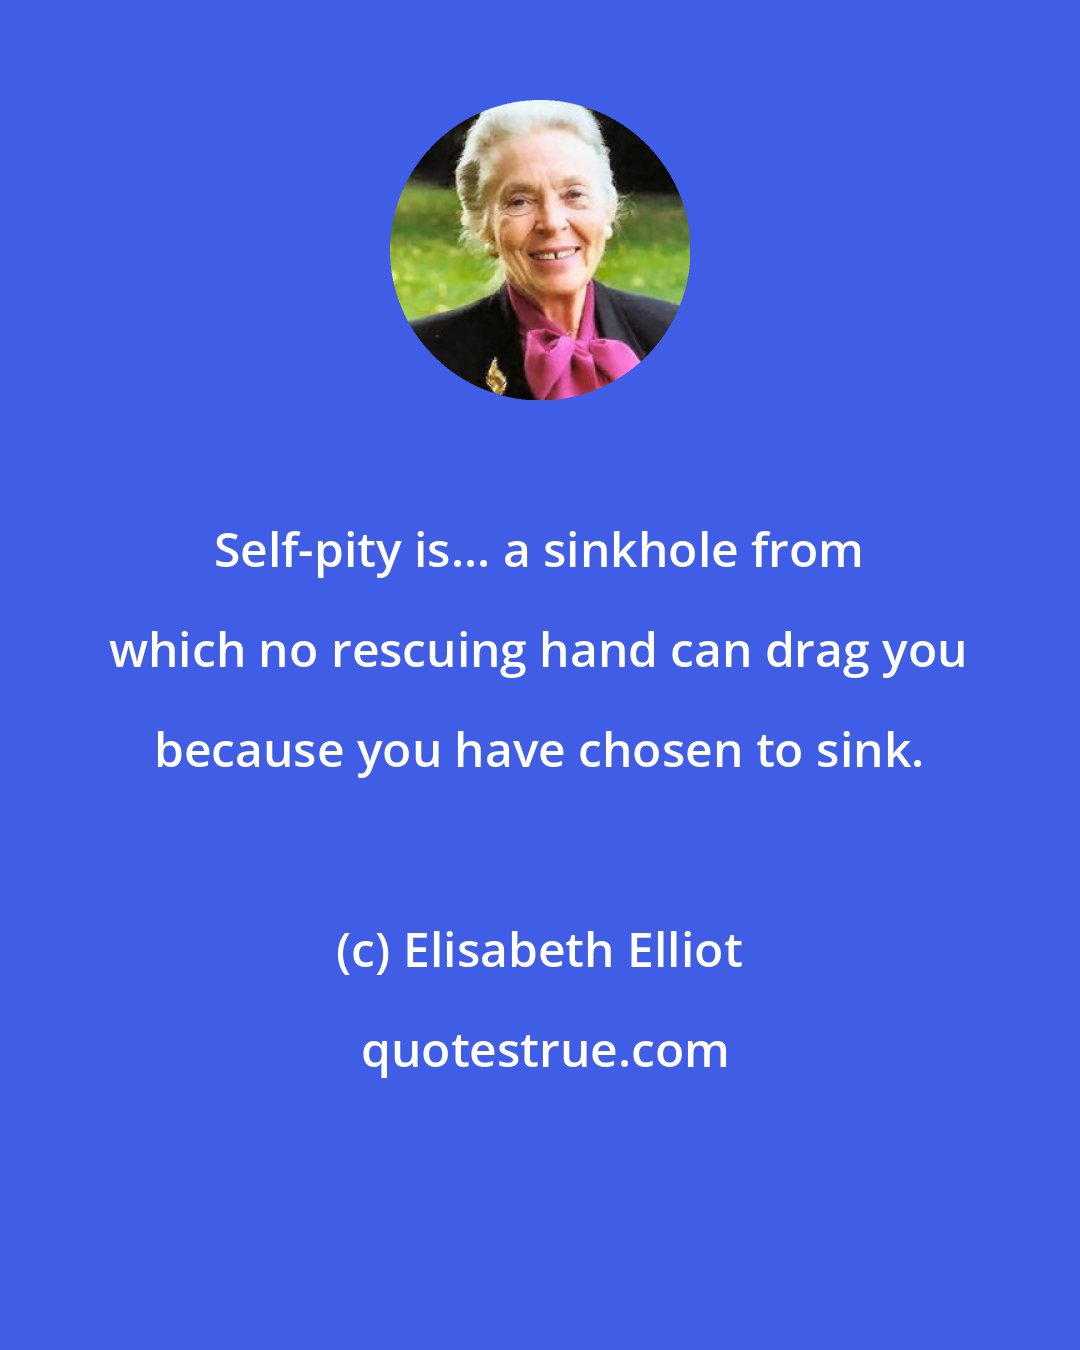 Elisabeth Elliot: Self-pity is... a sinkhole from which no rescuing hand can drag you because you have chosen to sink.